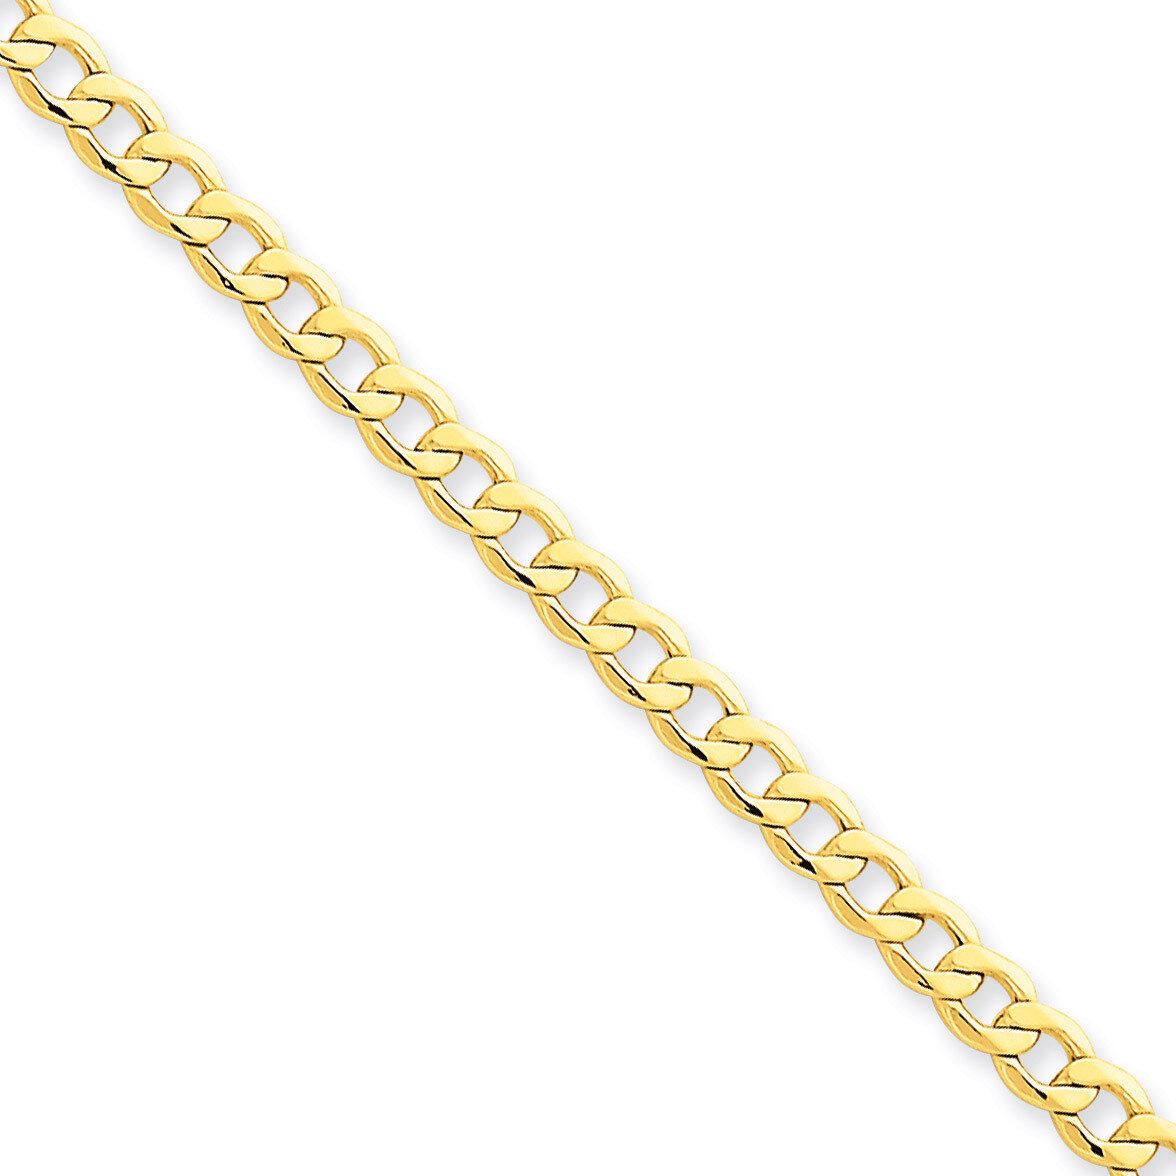 4.3mm Semi-Solid Curb Link Chain 7 Inch 14k Gold BC107-7